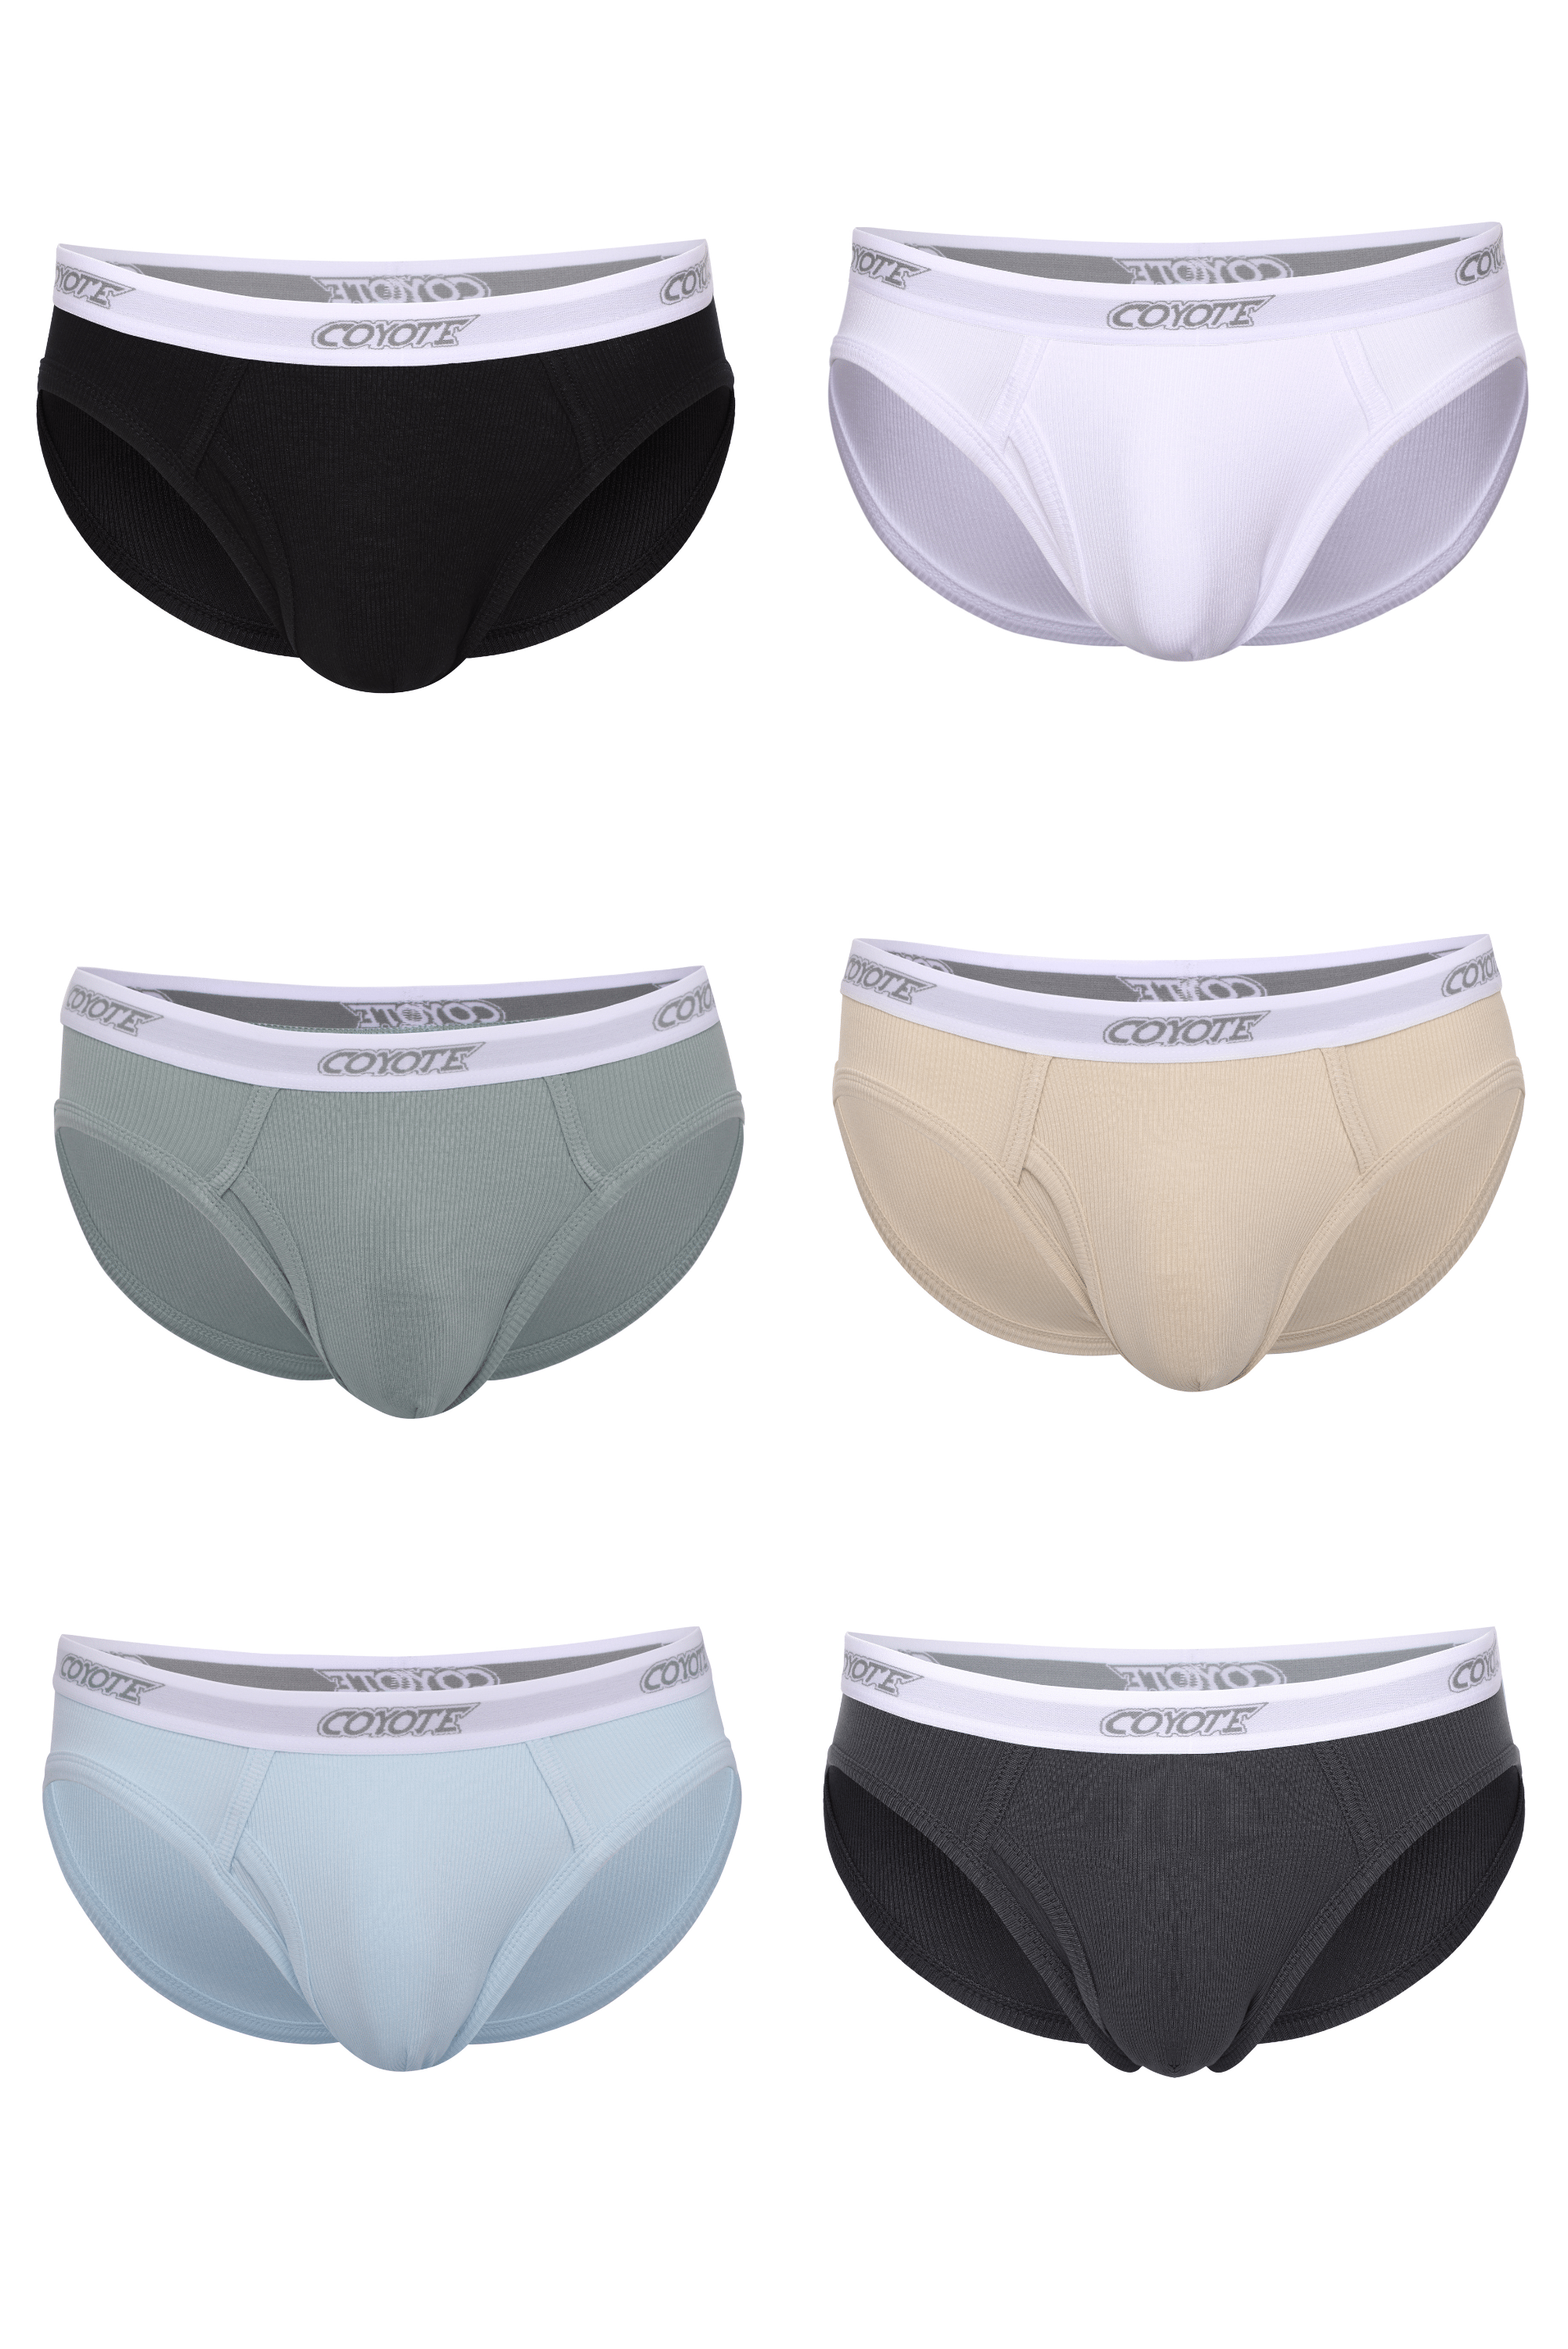 Cotton Rib Fly Front Brief 6-Pack - Coyote Jocks 